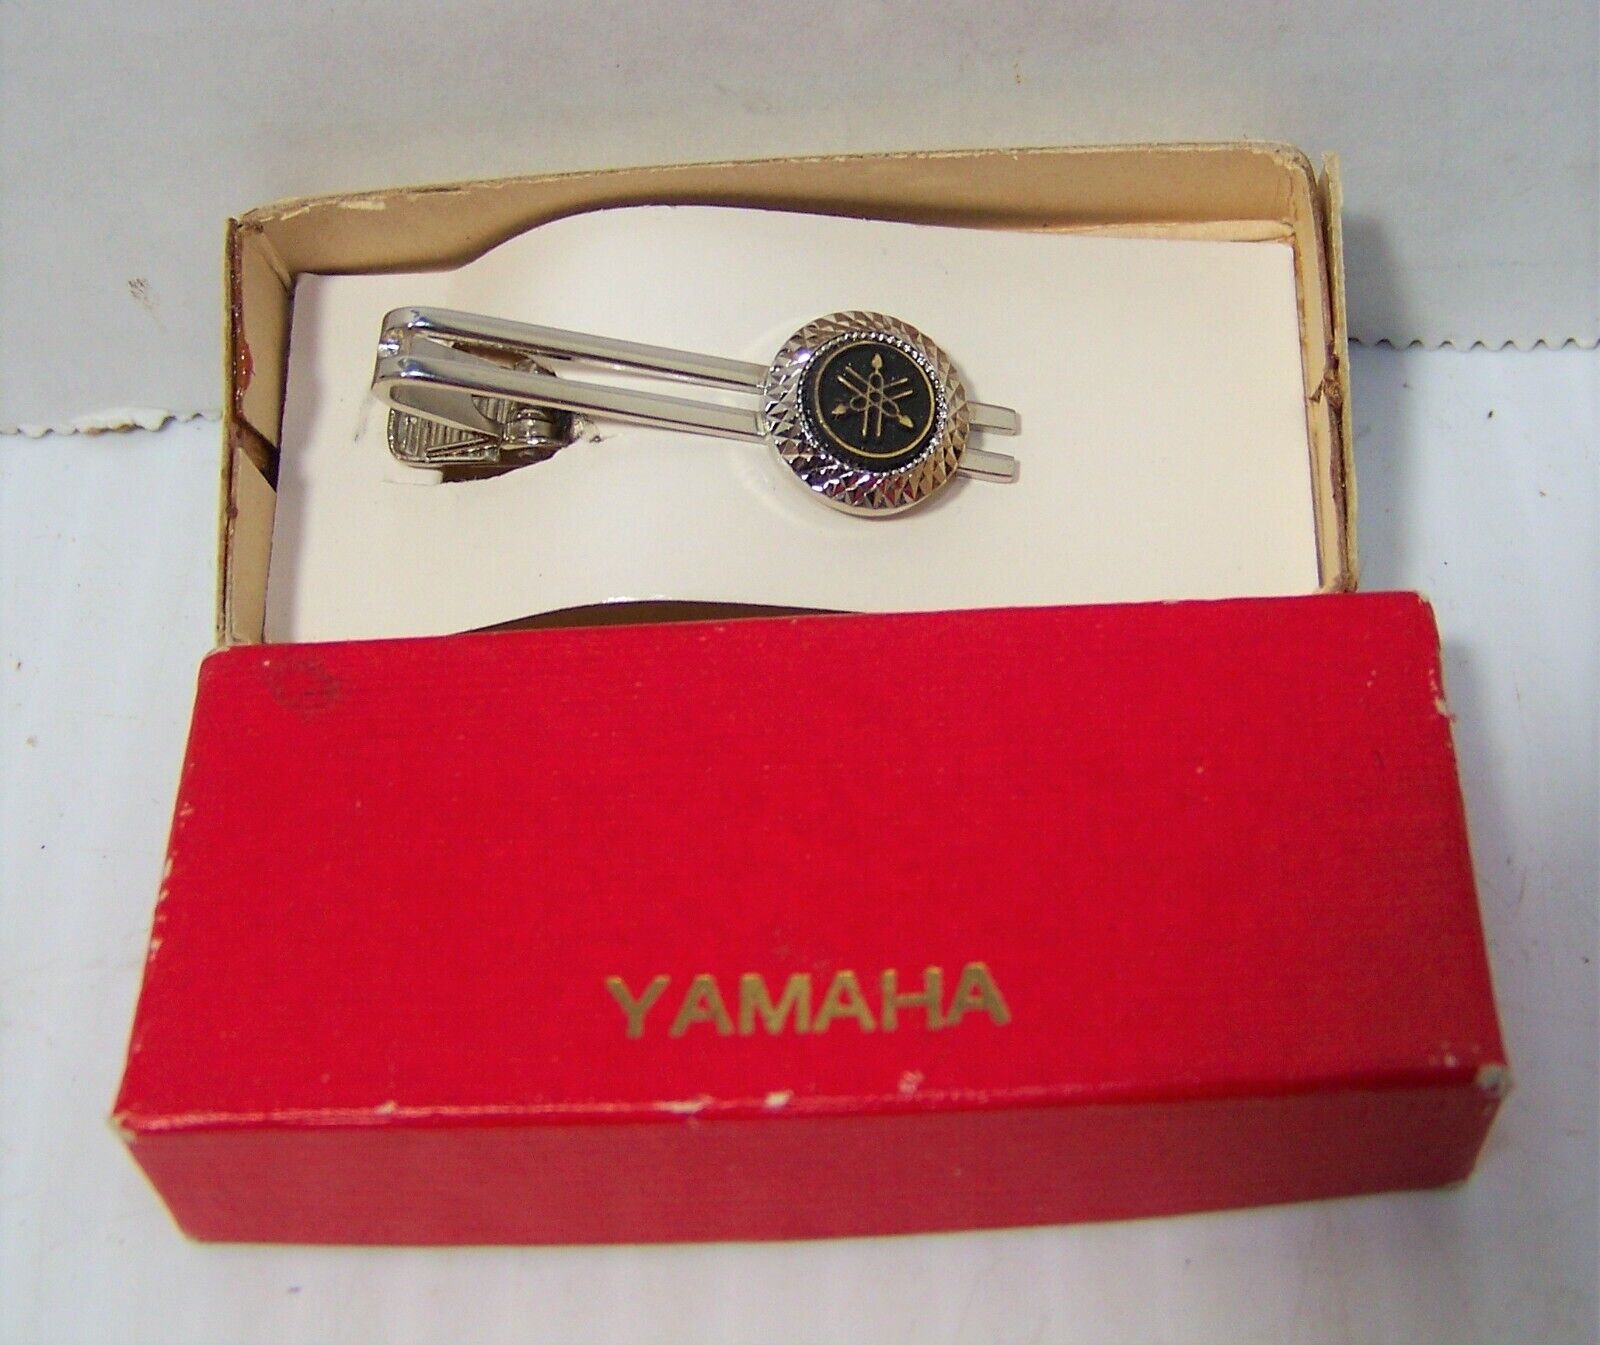 YAMAHA VINTAGE Motorcycle - Tie Clip - GIFT BOXED JAPAN